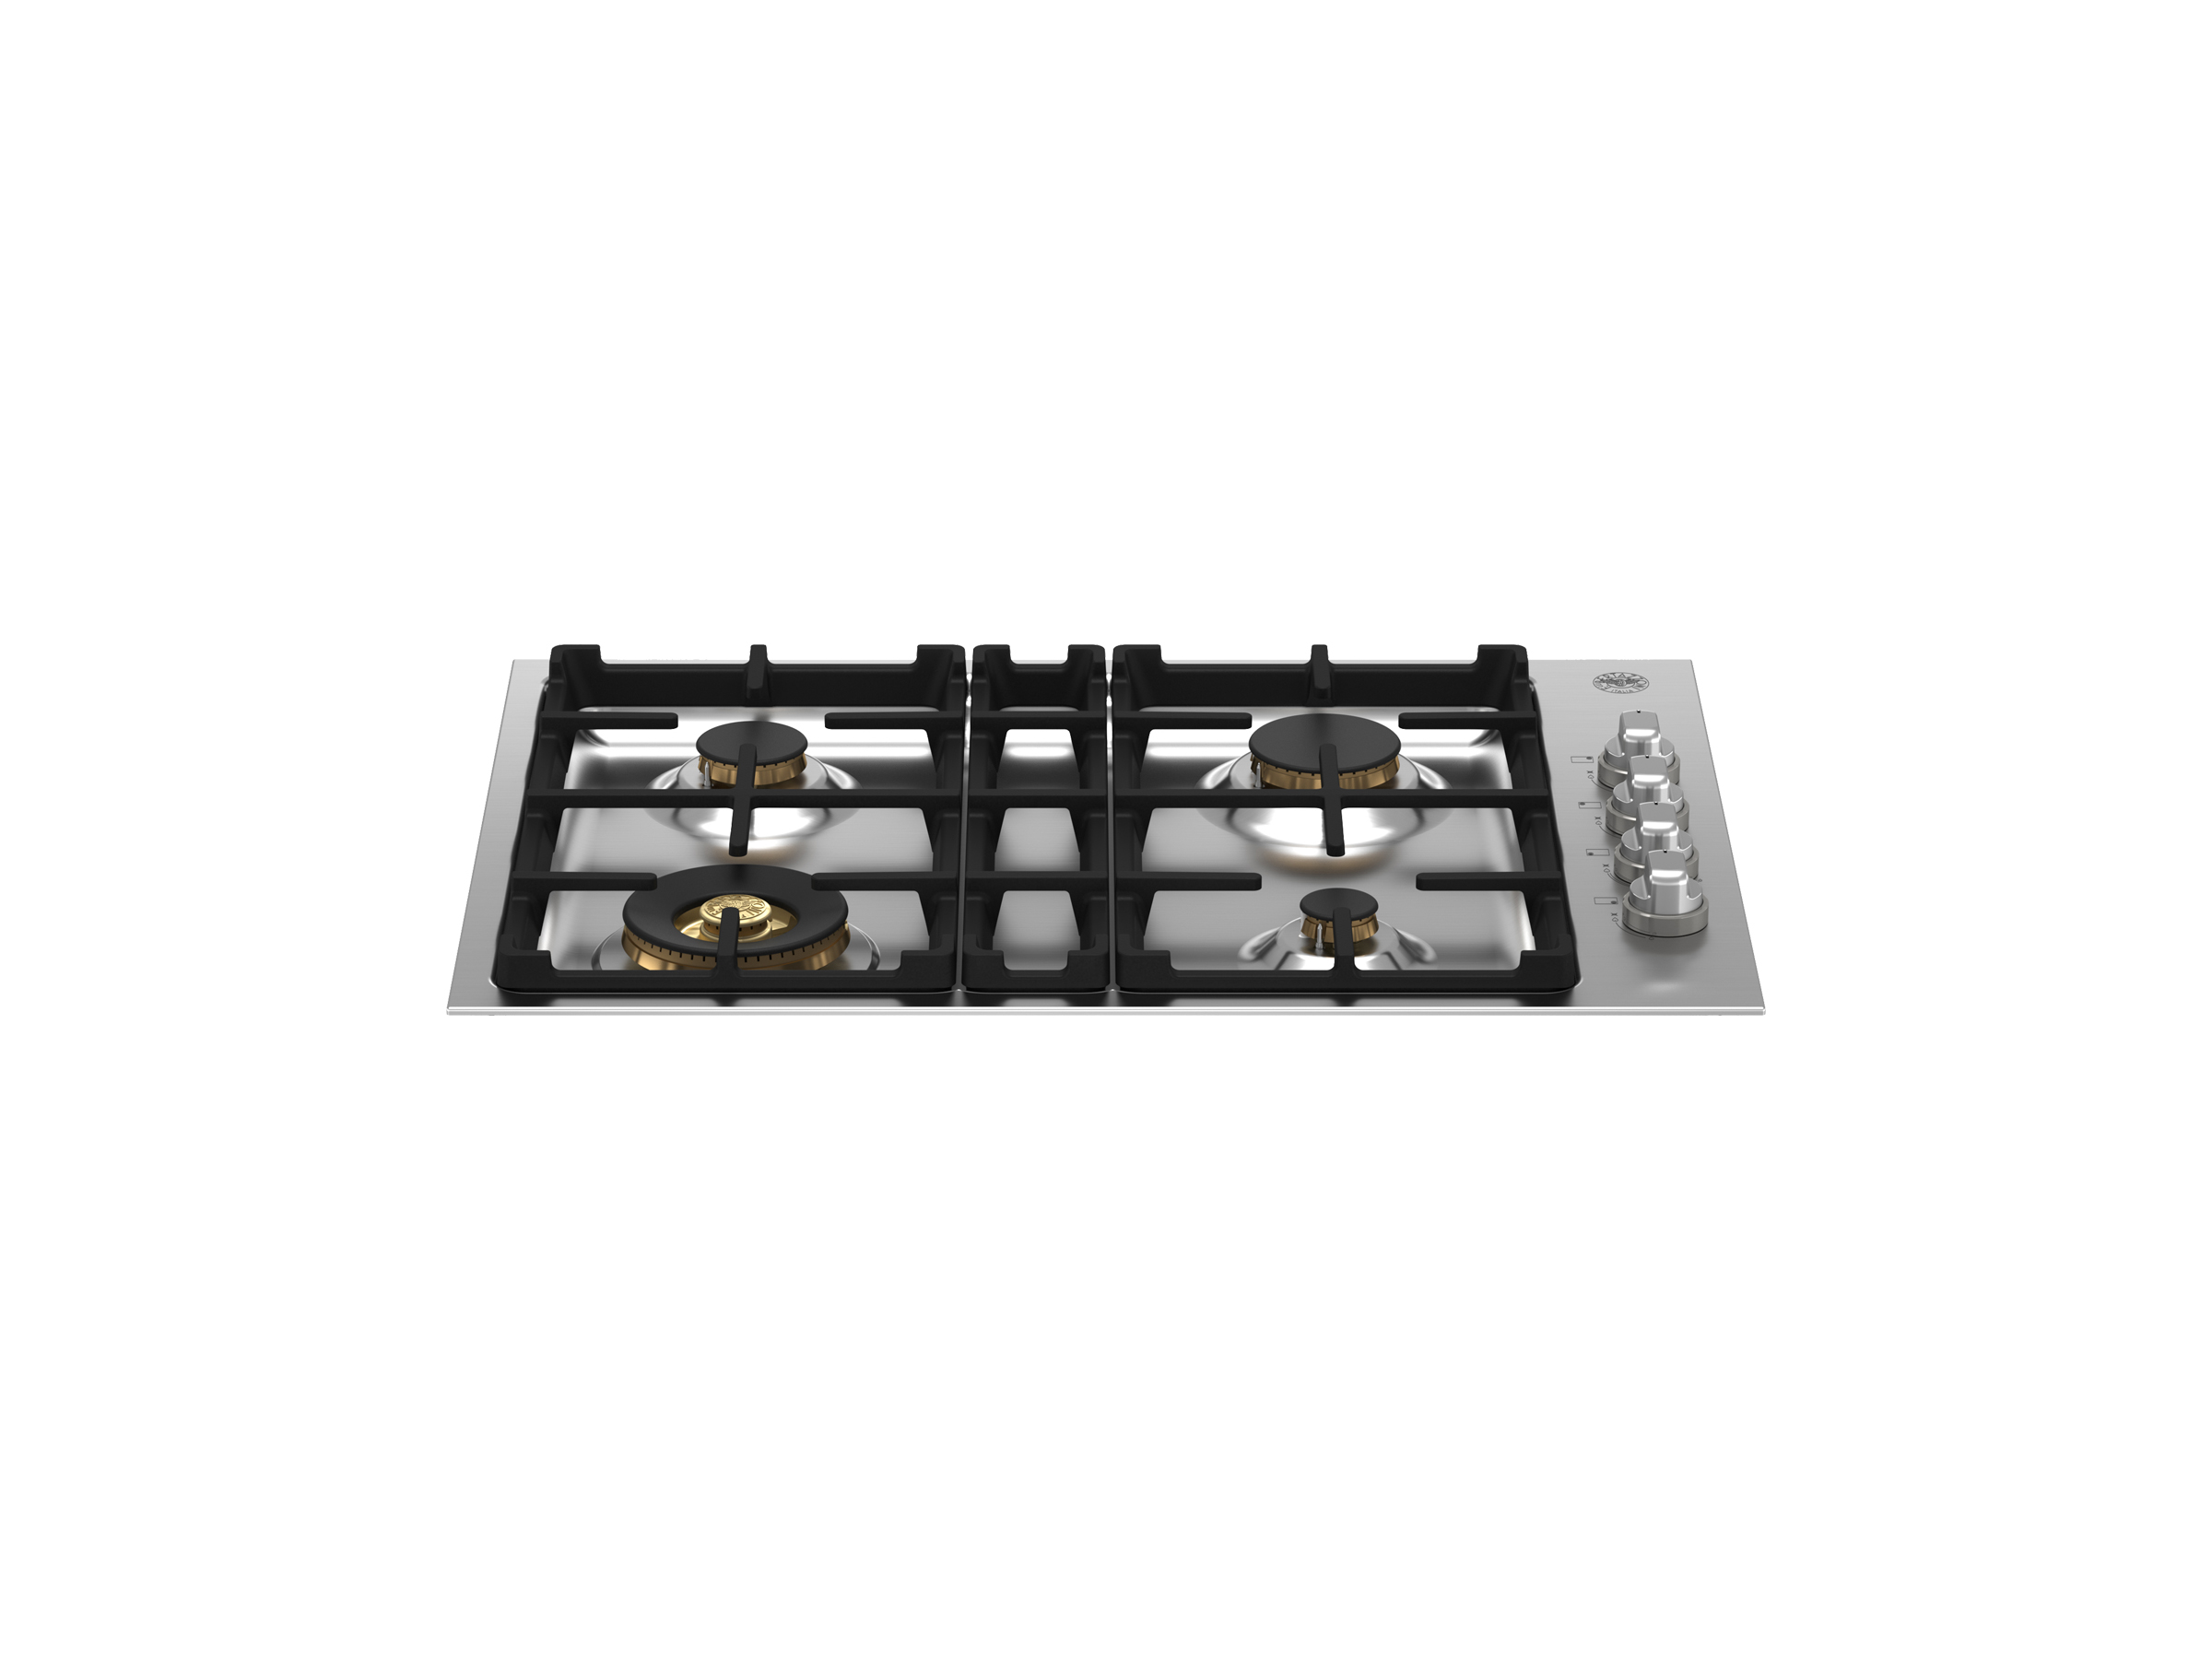 Bertazzoni Cast Iron Griddle, Maine's Top Appliance and Mattress Retailer